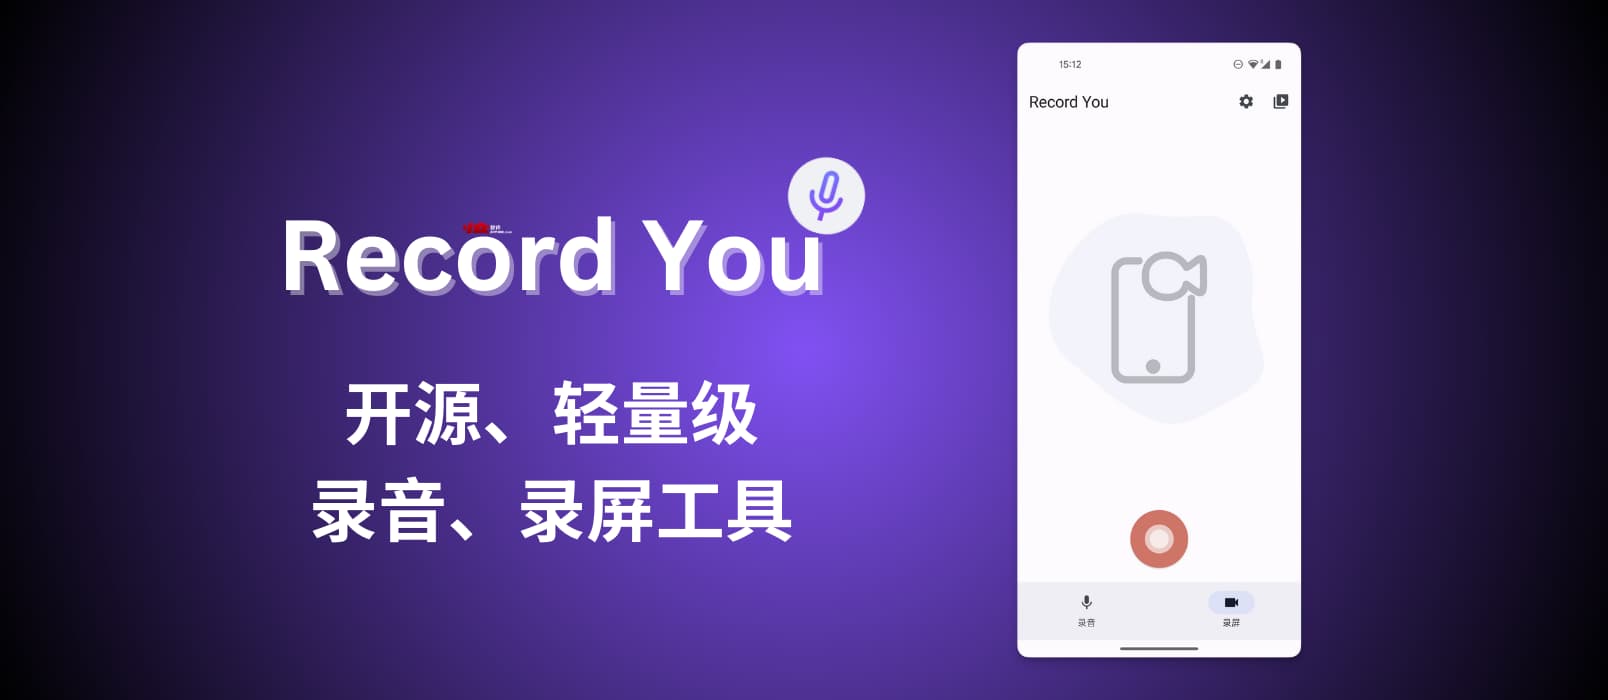 Record You - 开源、轻量级录音、录屏工具，Material Design 3 风格[Android] 1